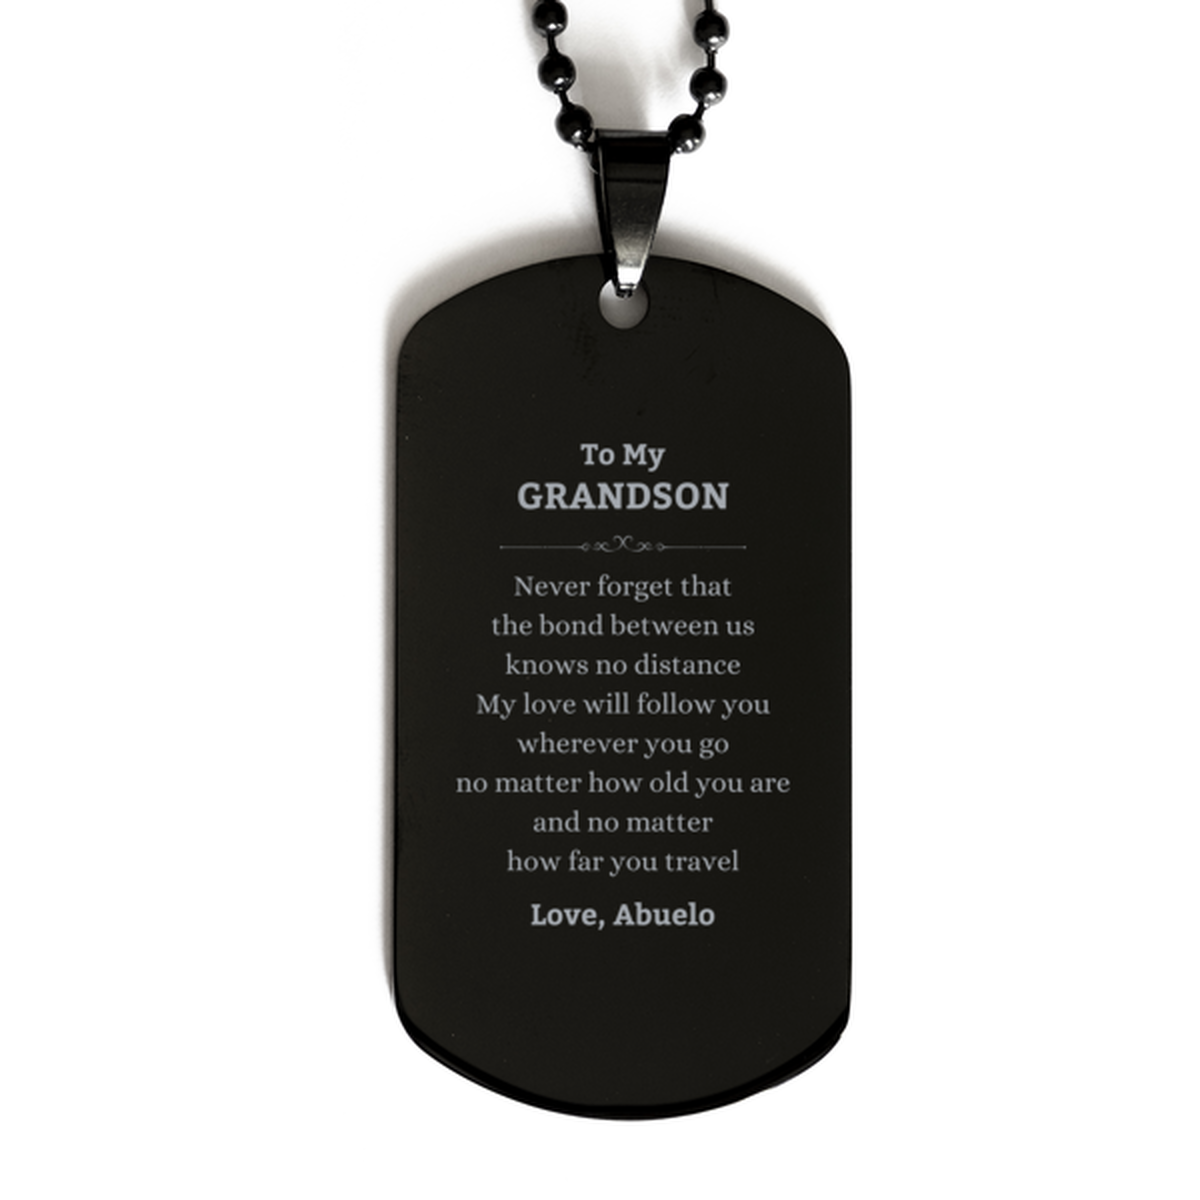 Grandson Birthday Gifts from Abuelo, Adjustable Black Dog Tag for Grandson Christmas Graduation Unique Gifts Grandson Never forget that the bond between us knows no distance. Love, Abuelo